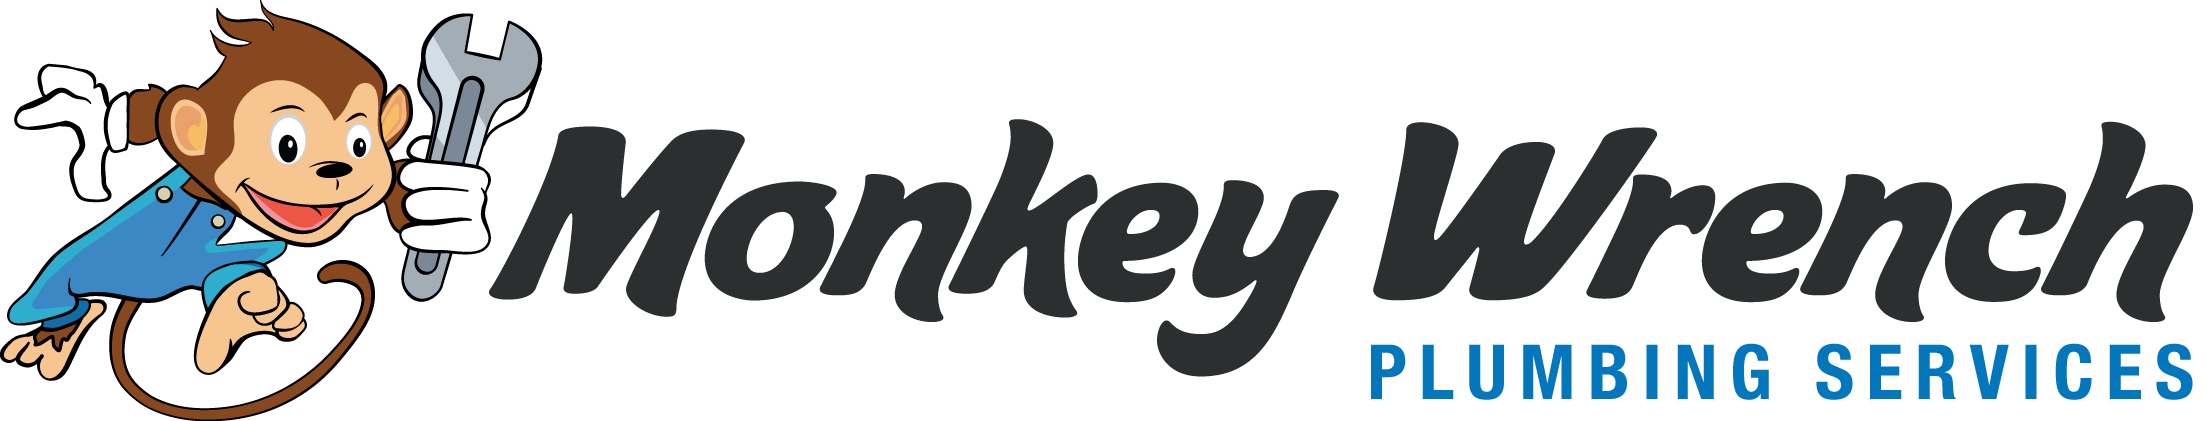 Monkey Wrench Plumbing Services, Manchester